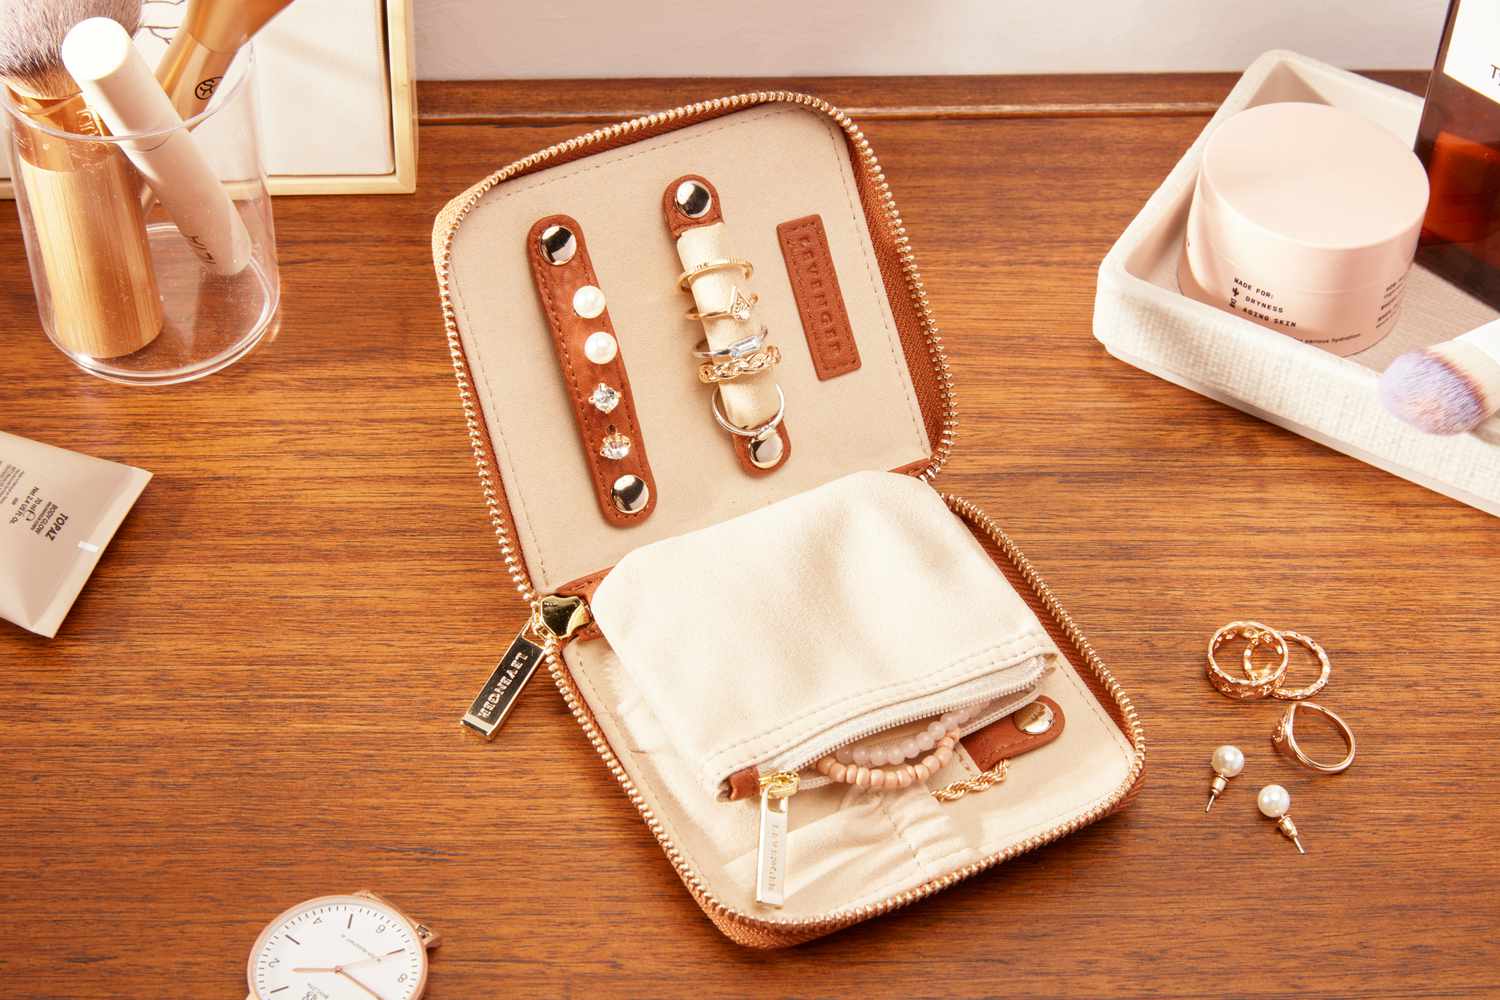 The Levenger Carrie Mini Jewelry Organizer open with jewelry inside.